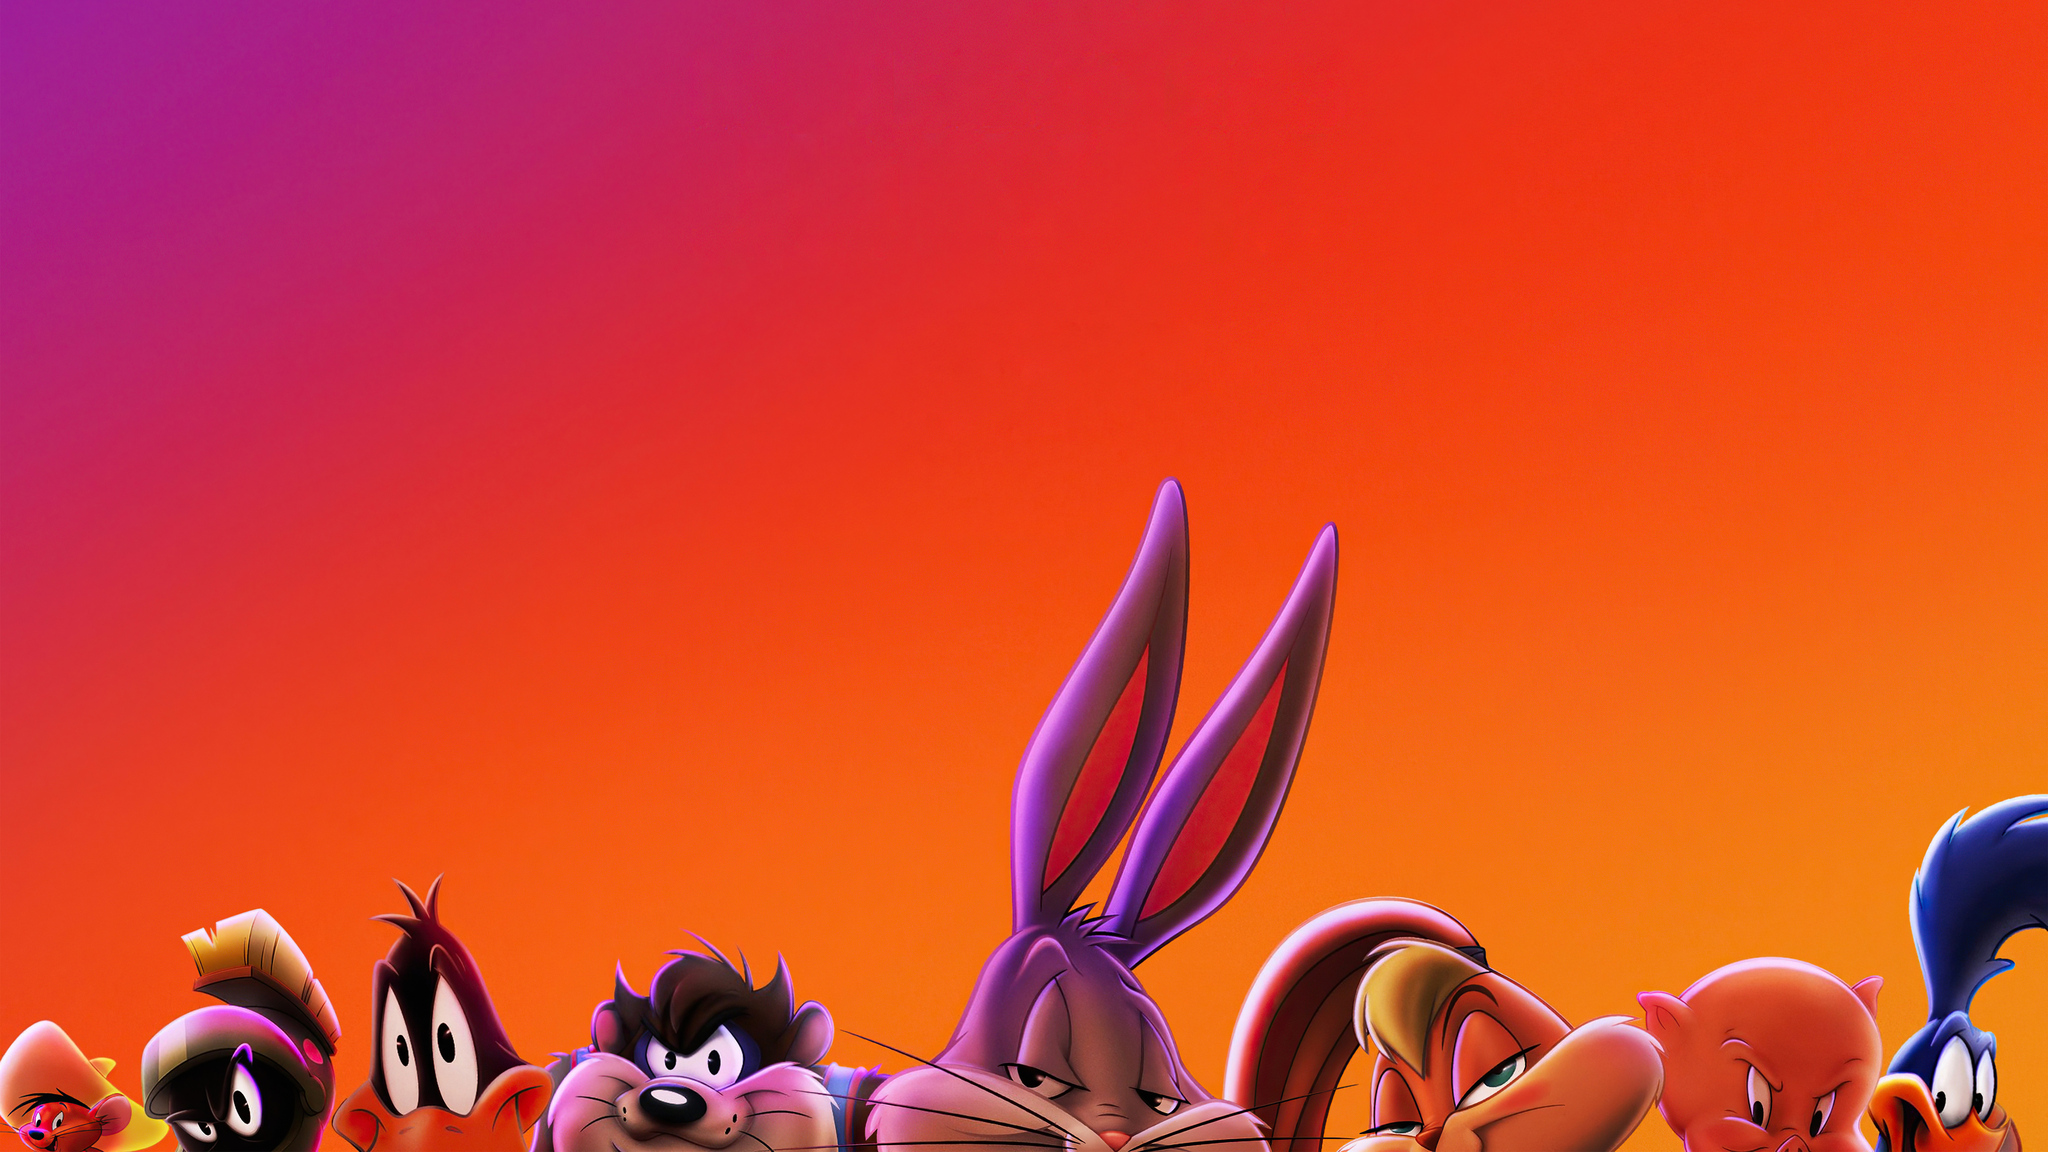 5k-wallpapers. space-jam-a-new-legacy-wallpapers. 